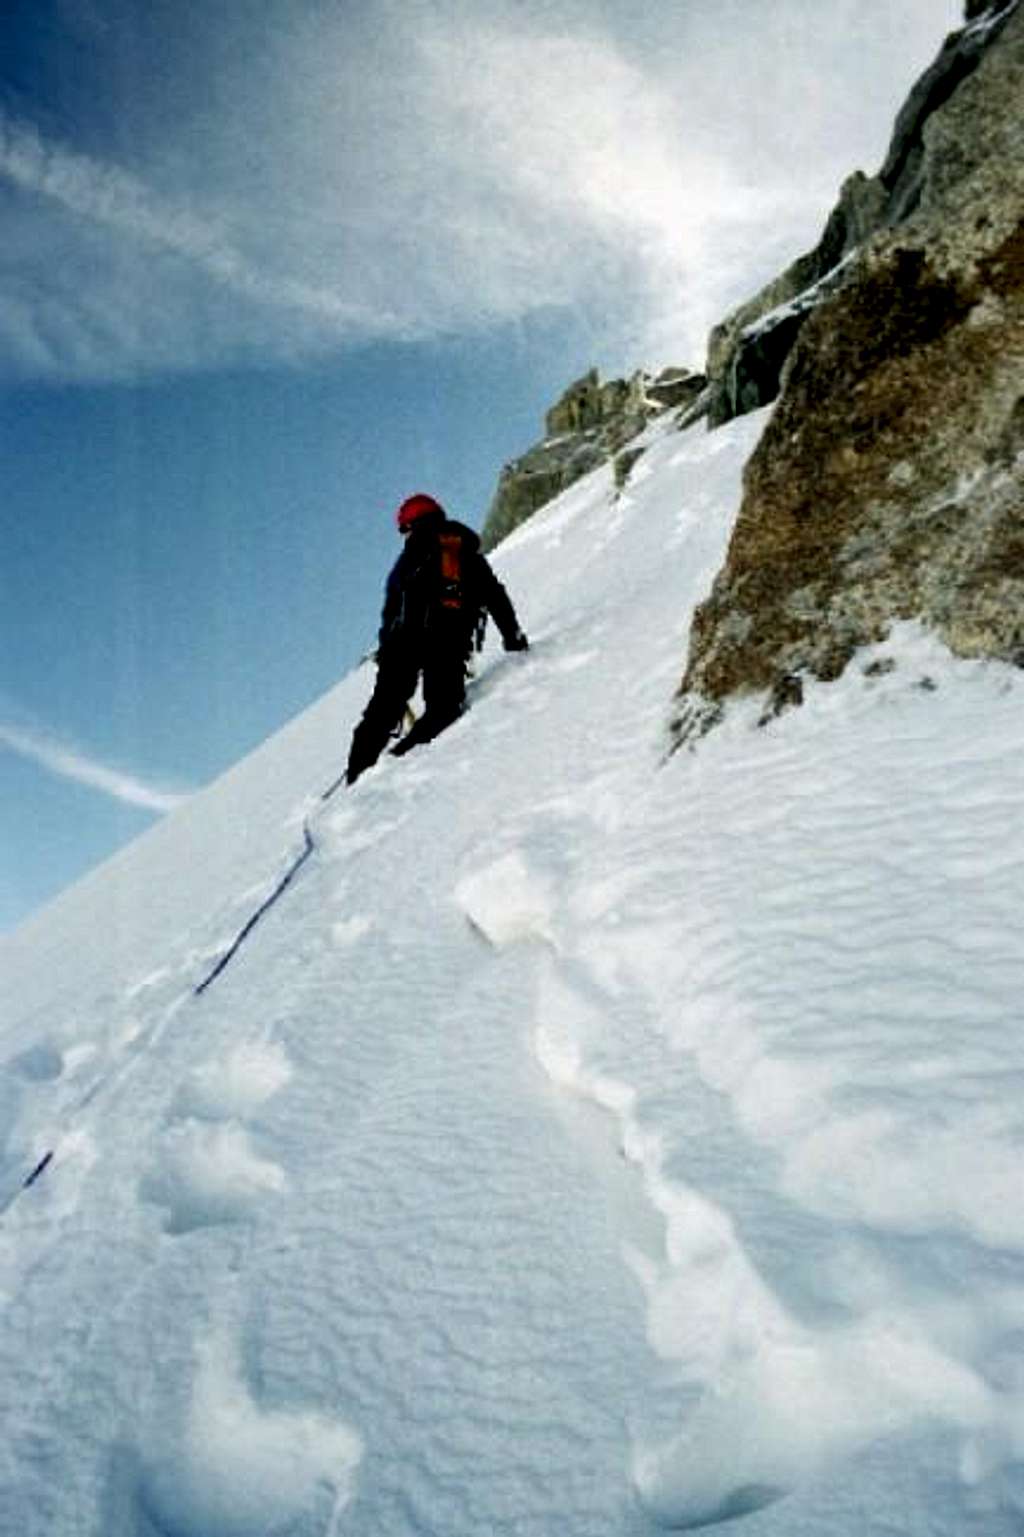 On the way to the summit